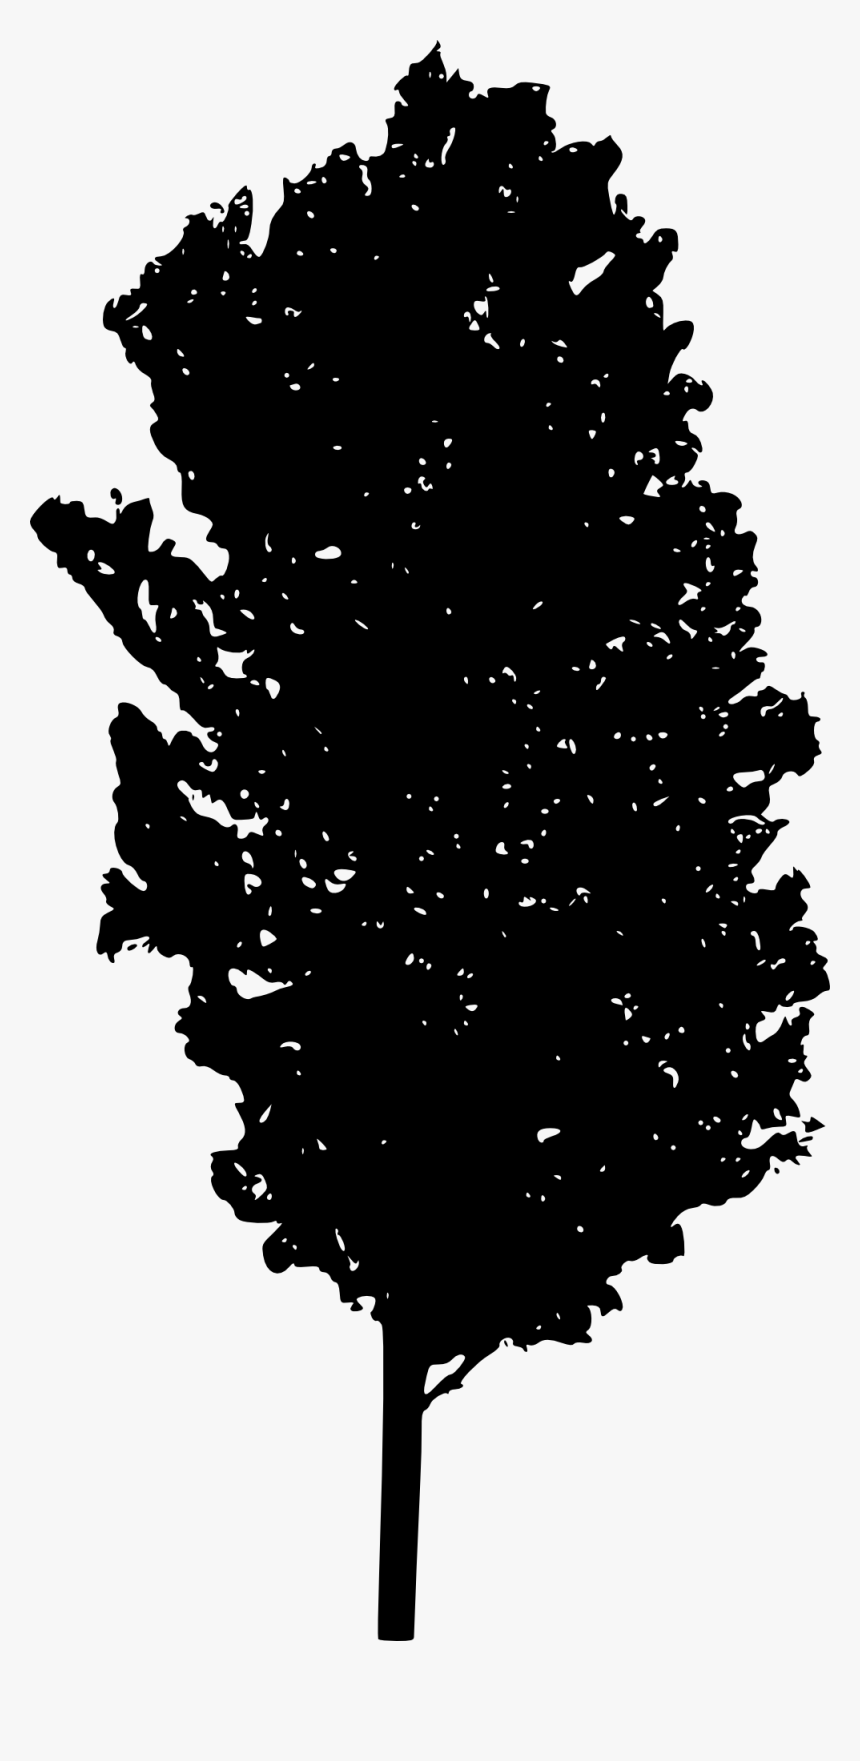 Tree Silhouette 2 - Free Black And White Tree Silhouettes, HD Png Download, Free Download